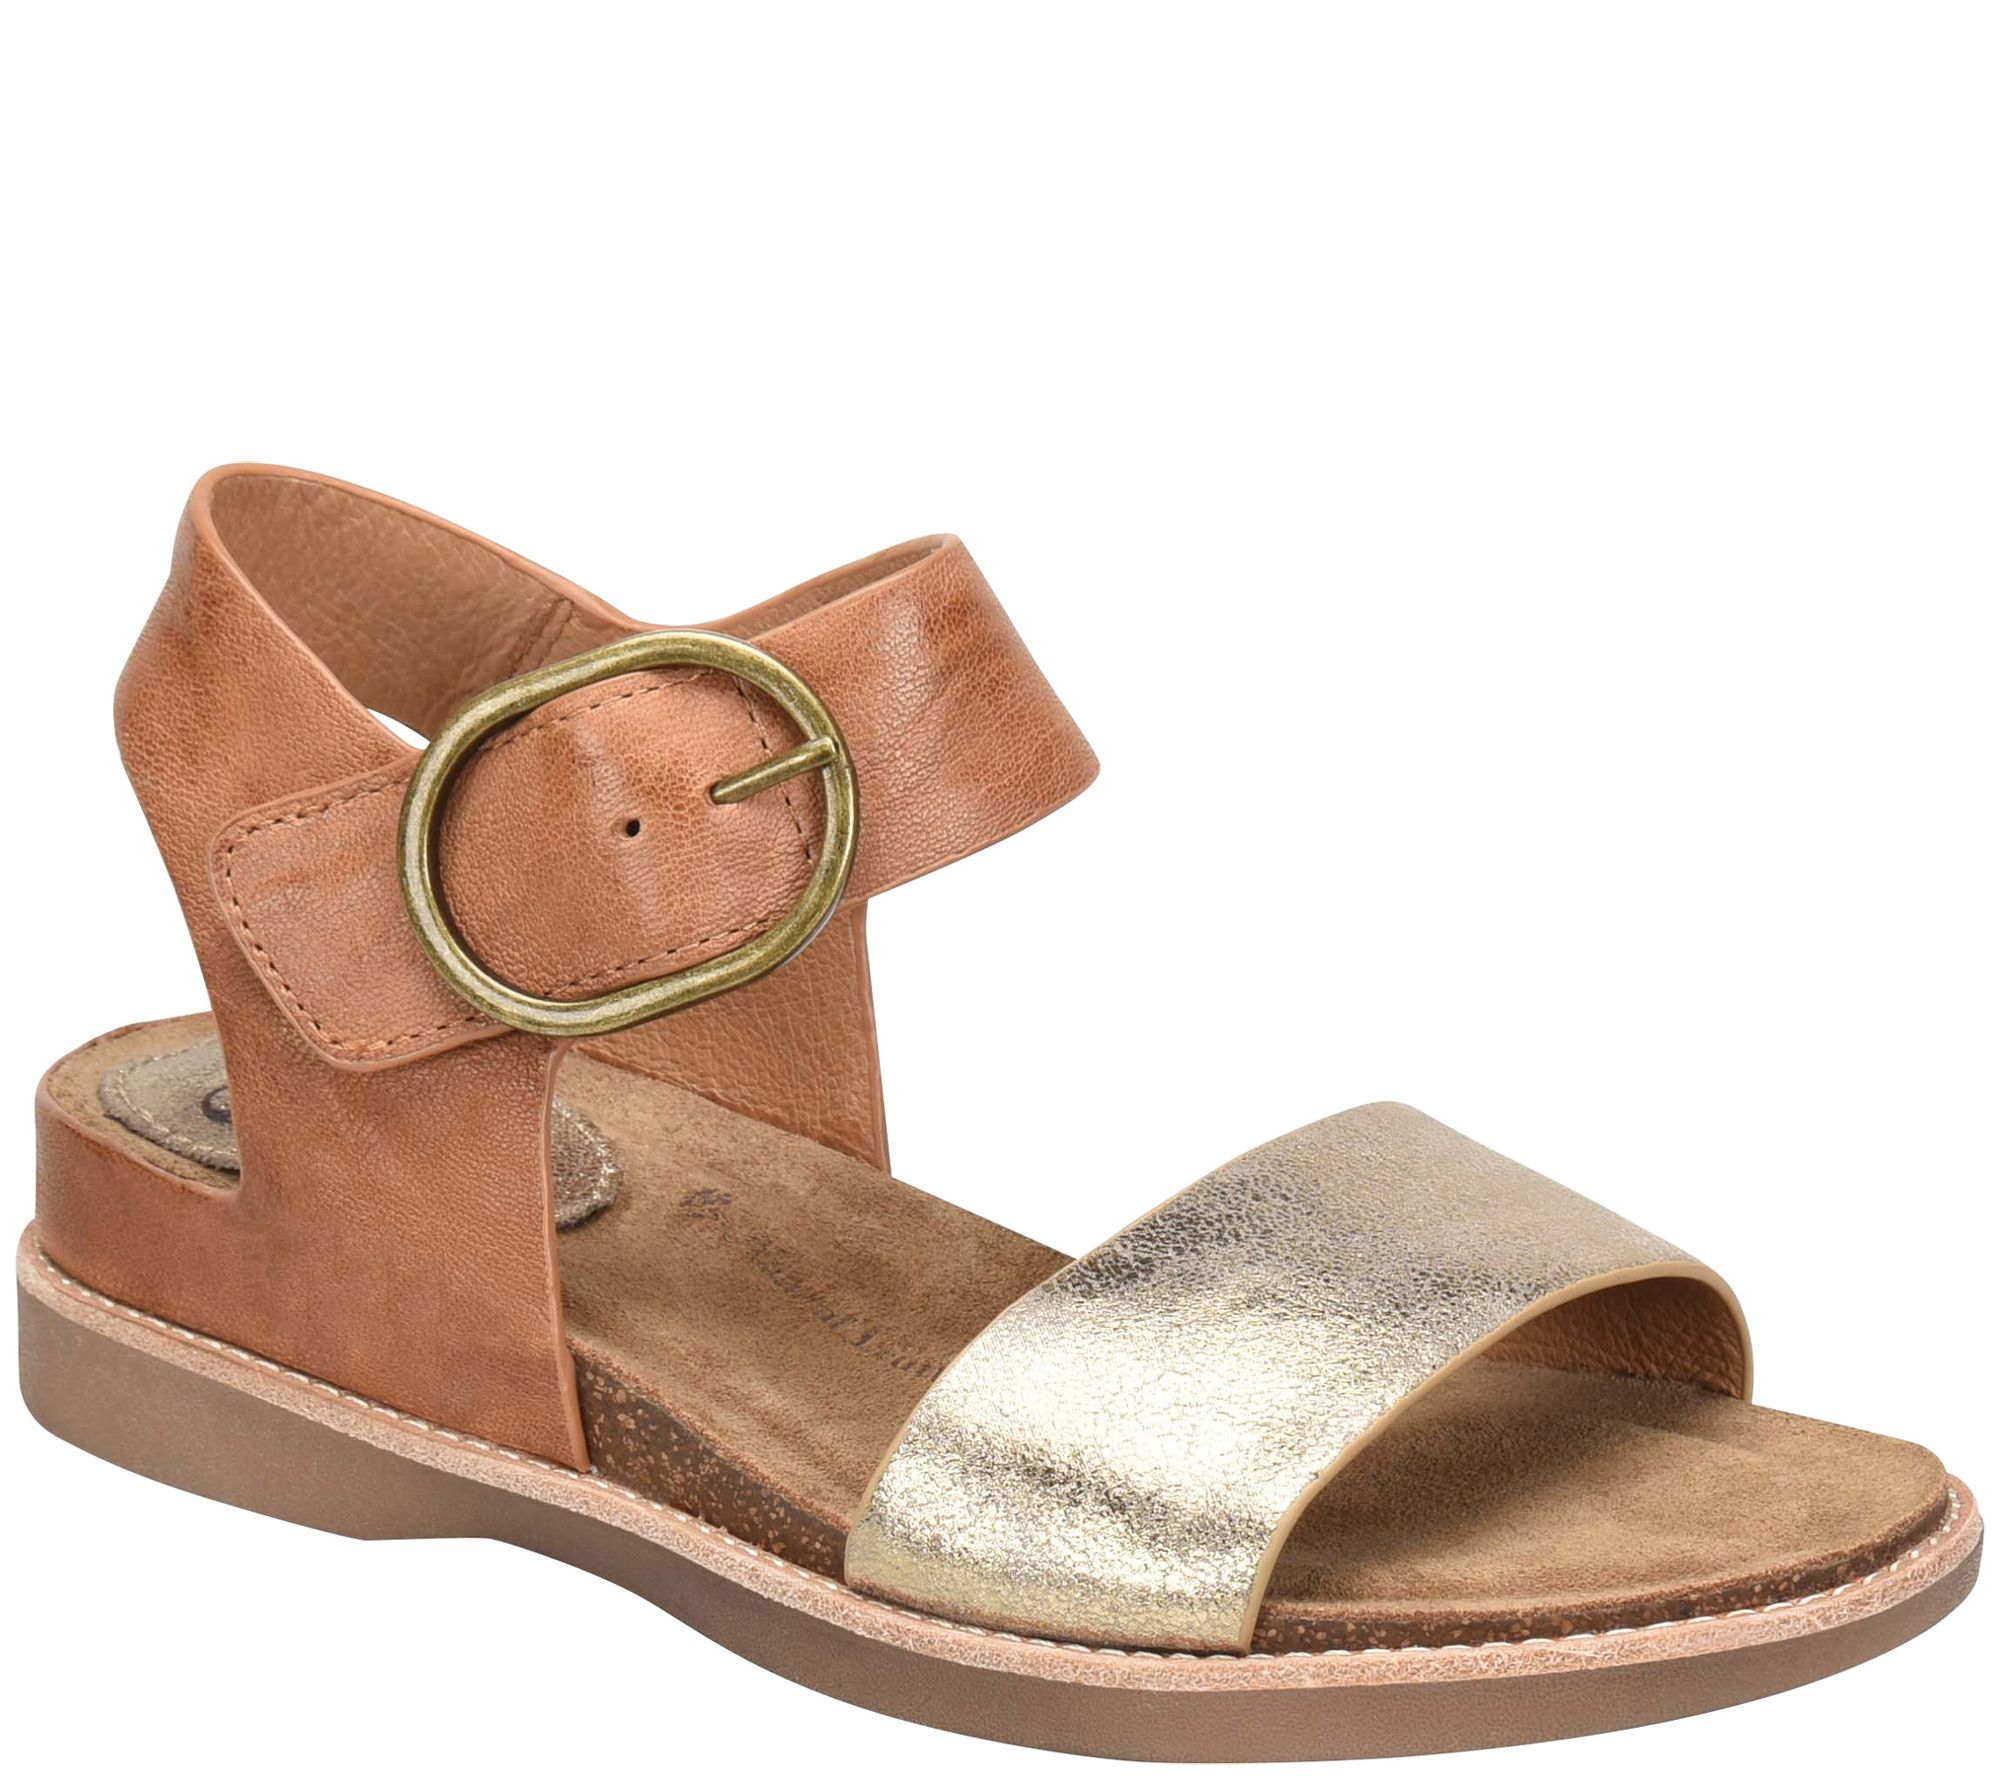 Sofft Leather Walking Sandals - Bali - Page 1 — QVC.com